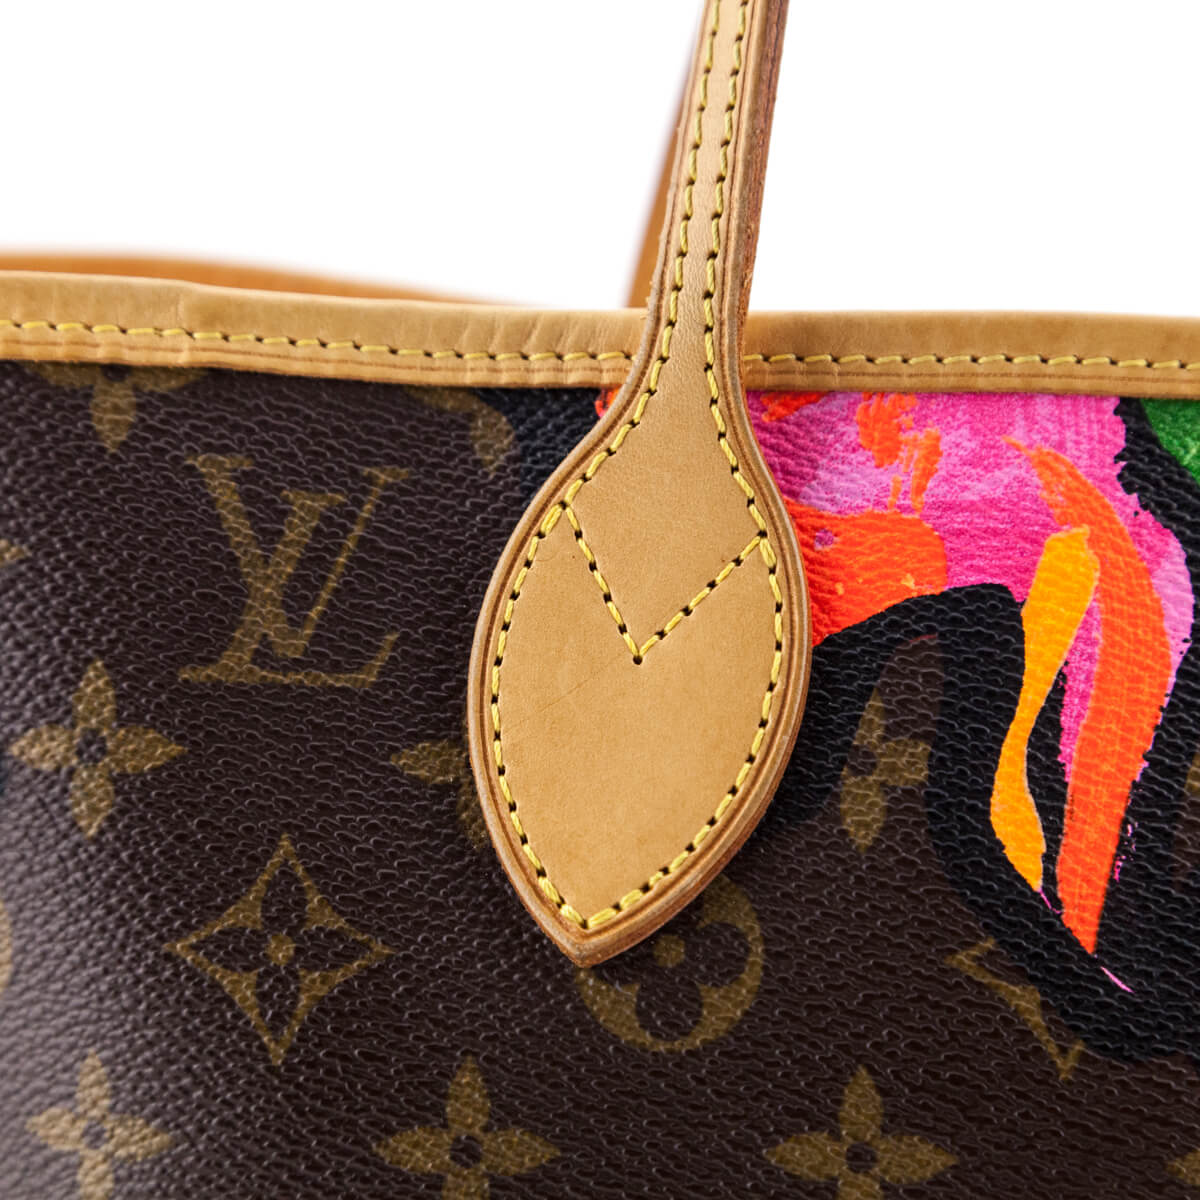 Louis Vuitton Stephen Sprouse Roses Neverfull MM at Jill's Consignment